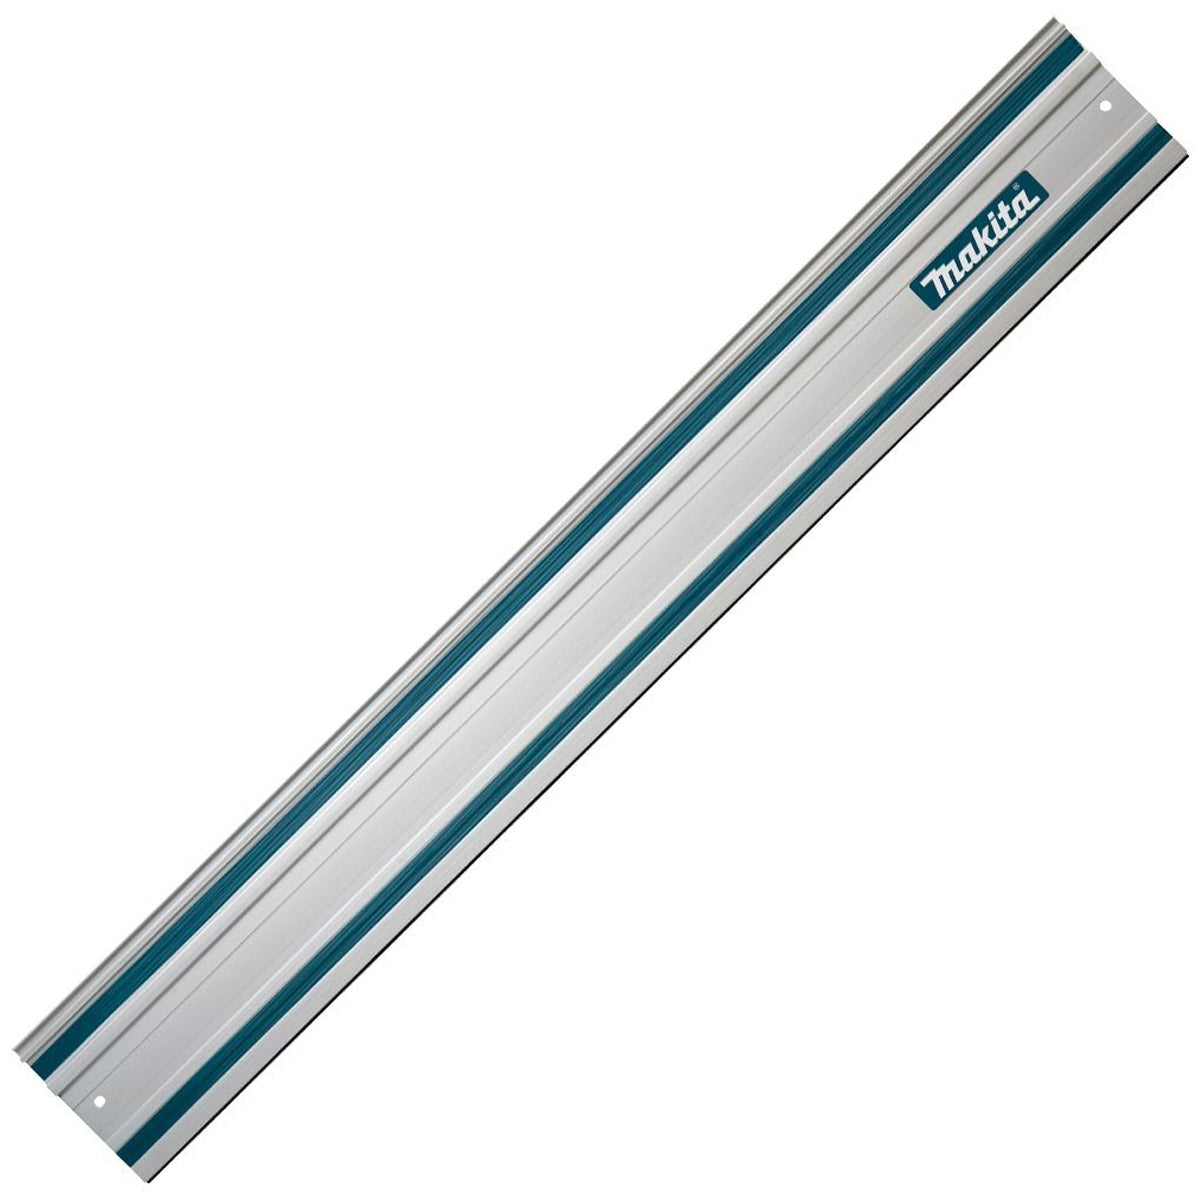 Makita 199141-8 1.5m Plunge Saw Guide Rail for SP6000K & SP6000J